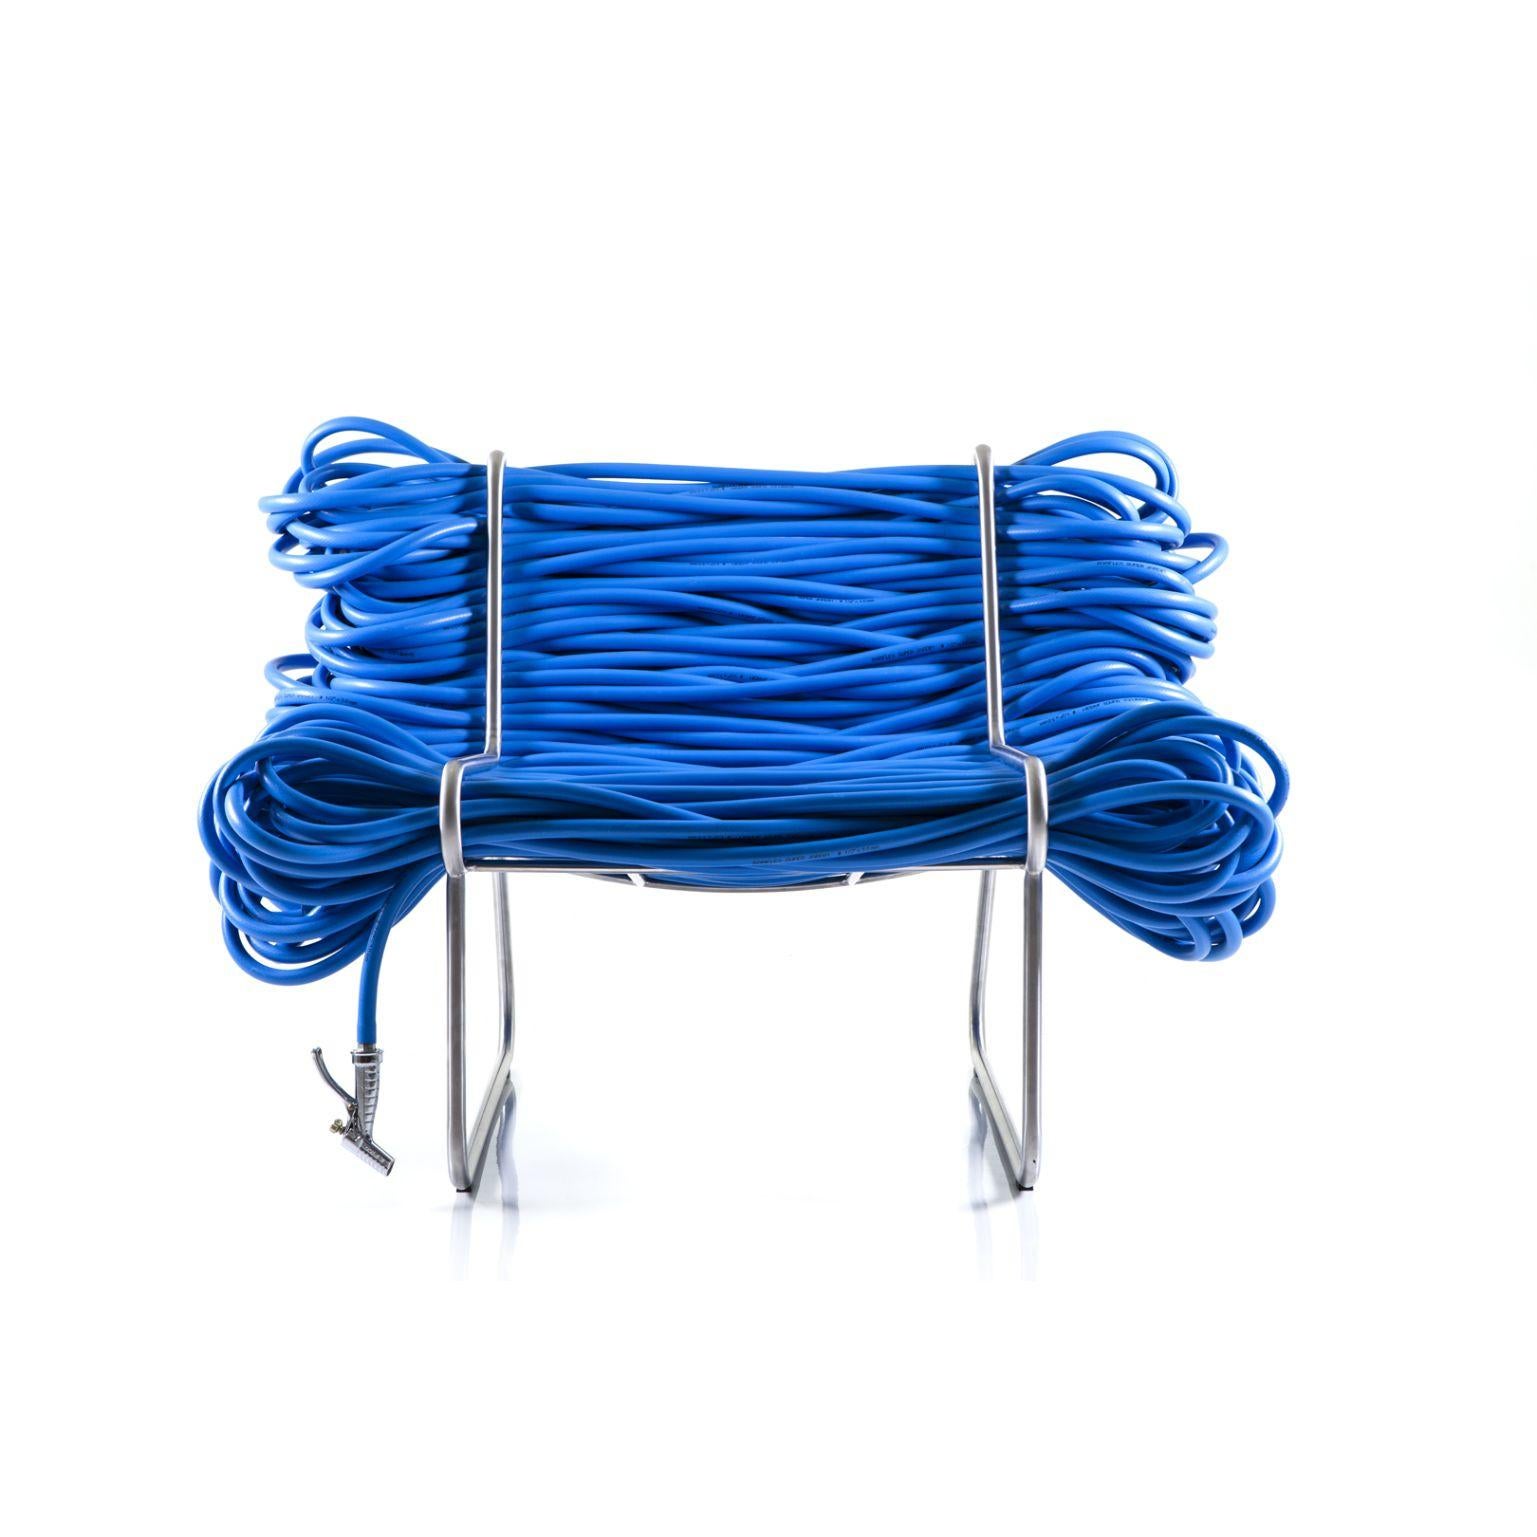 Super Jardim - Blue armchair by Cultivado Em Casa
Dimensions: 105 x 80 x 73 cm
Materials: Stainless steel, PVC hose, nozzle and faucet

Also available: green, red, black, yellow,

Using a 200-meter continuous garden hose, with a faucet at one